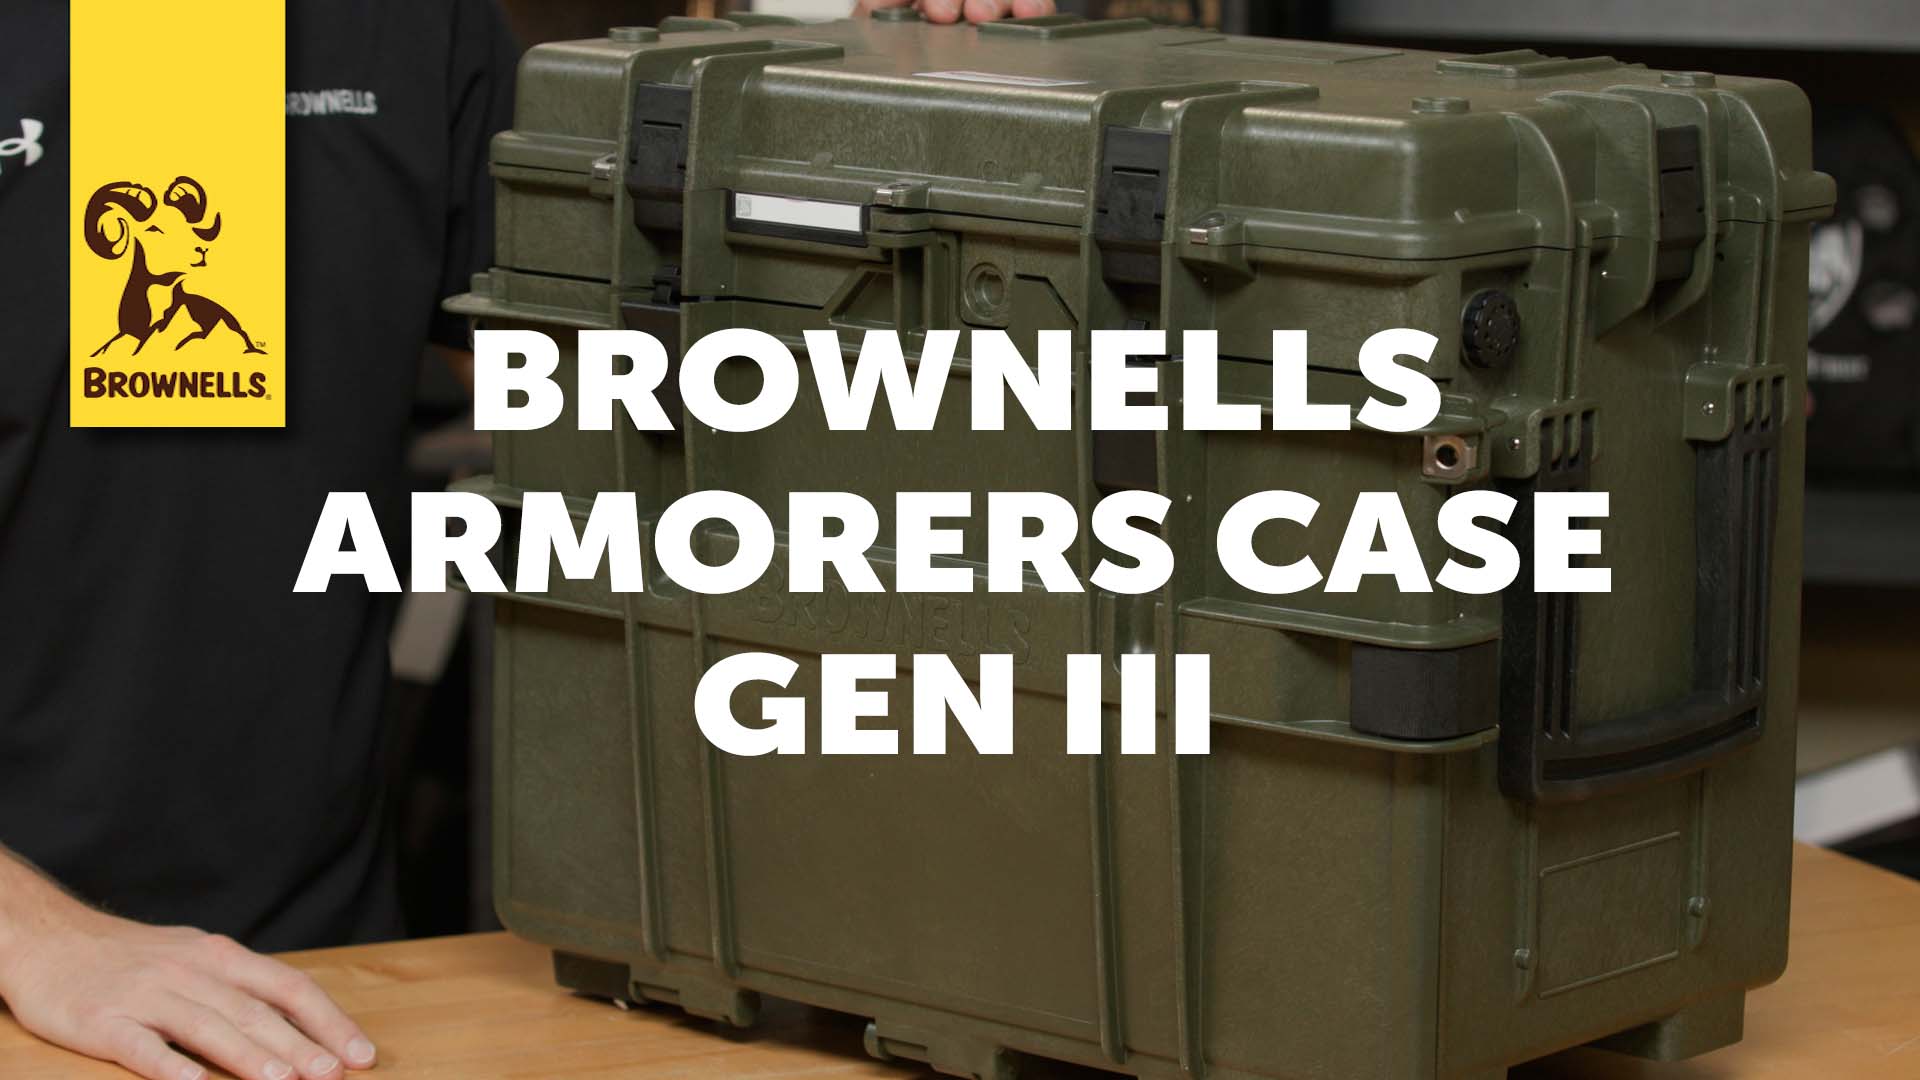 New Product: Brownells Armorer's Tool Case